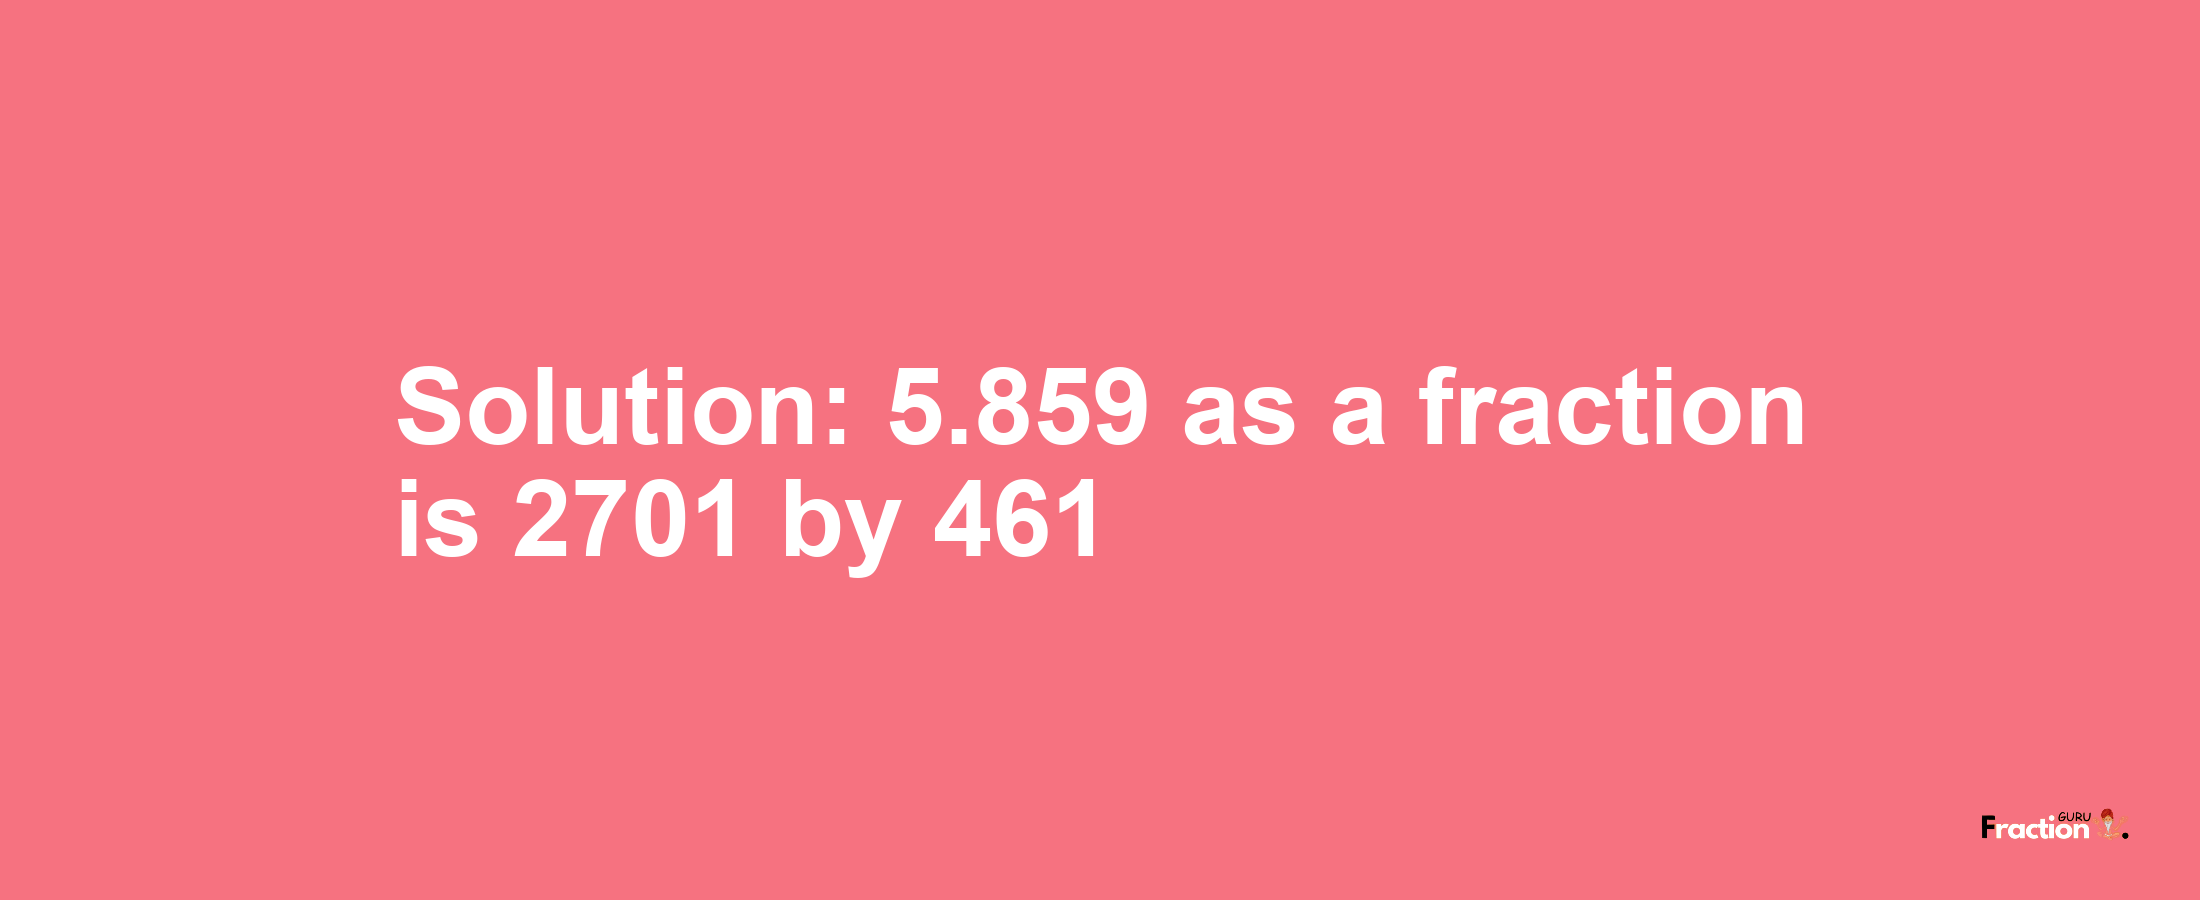 Solution:5.859 as a fraction is 2701/461